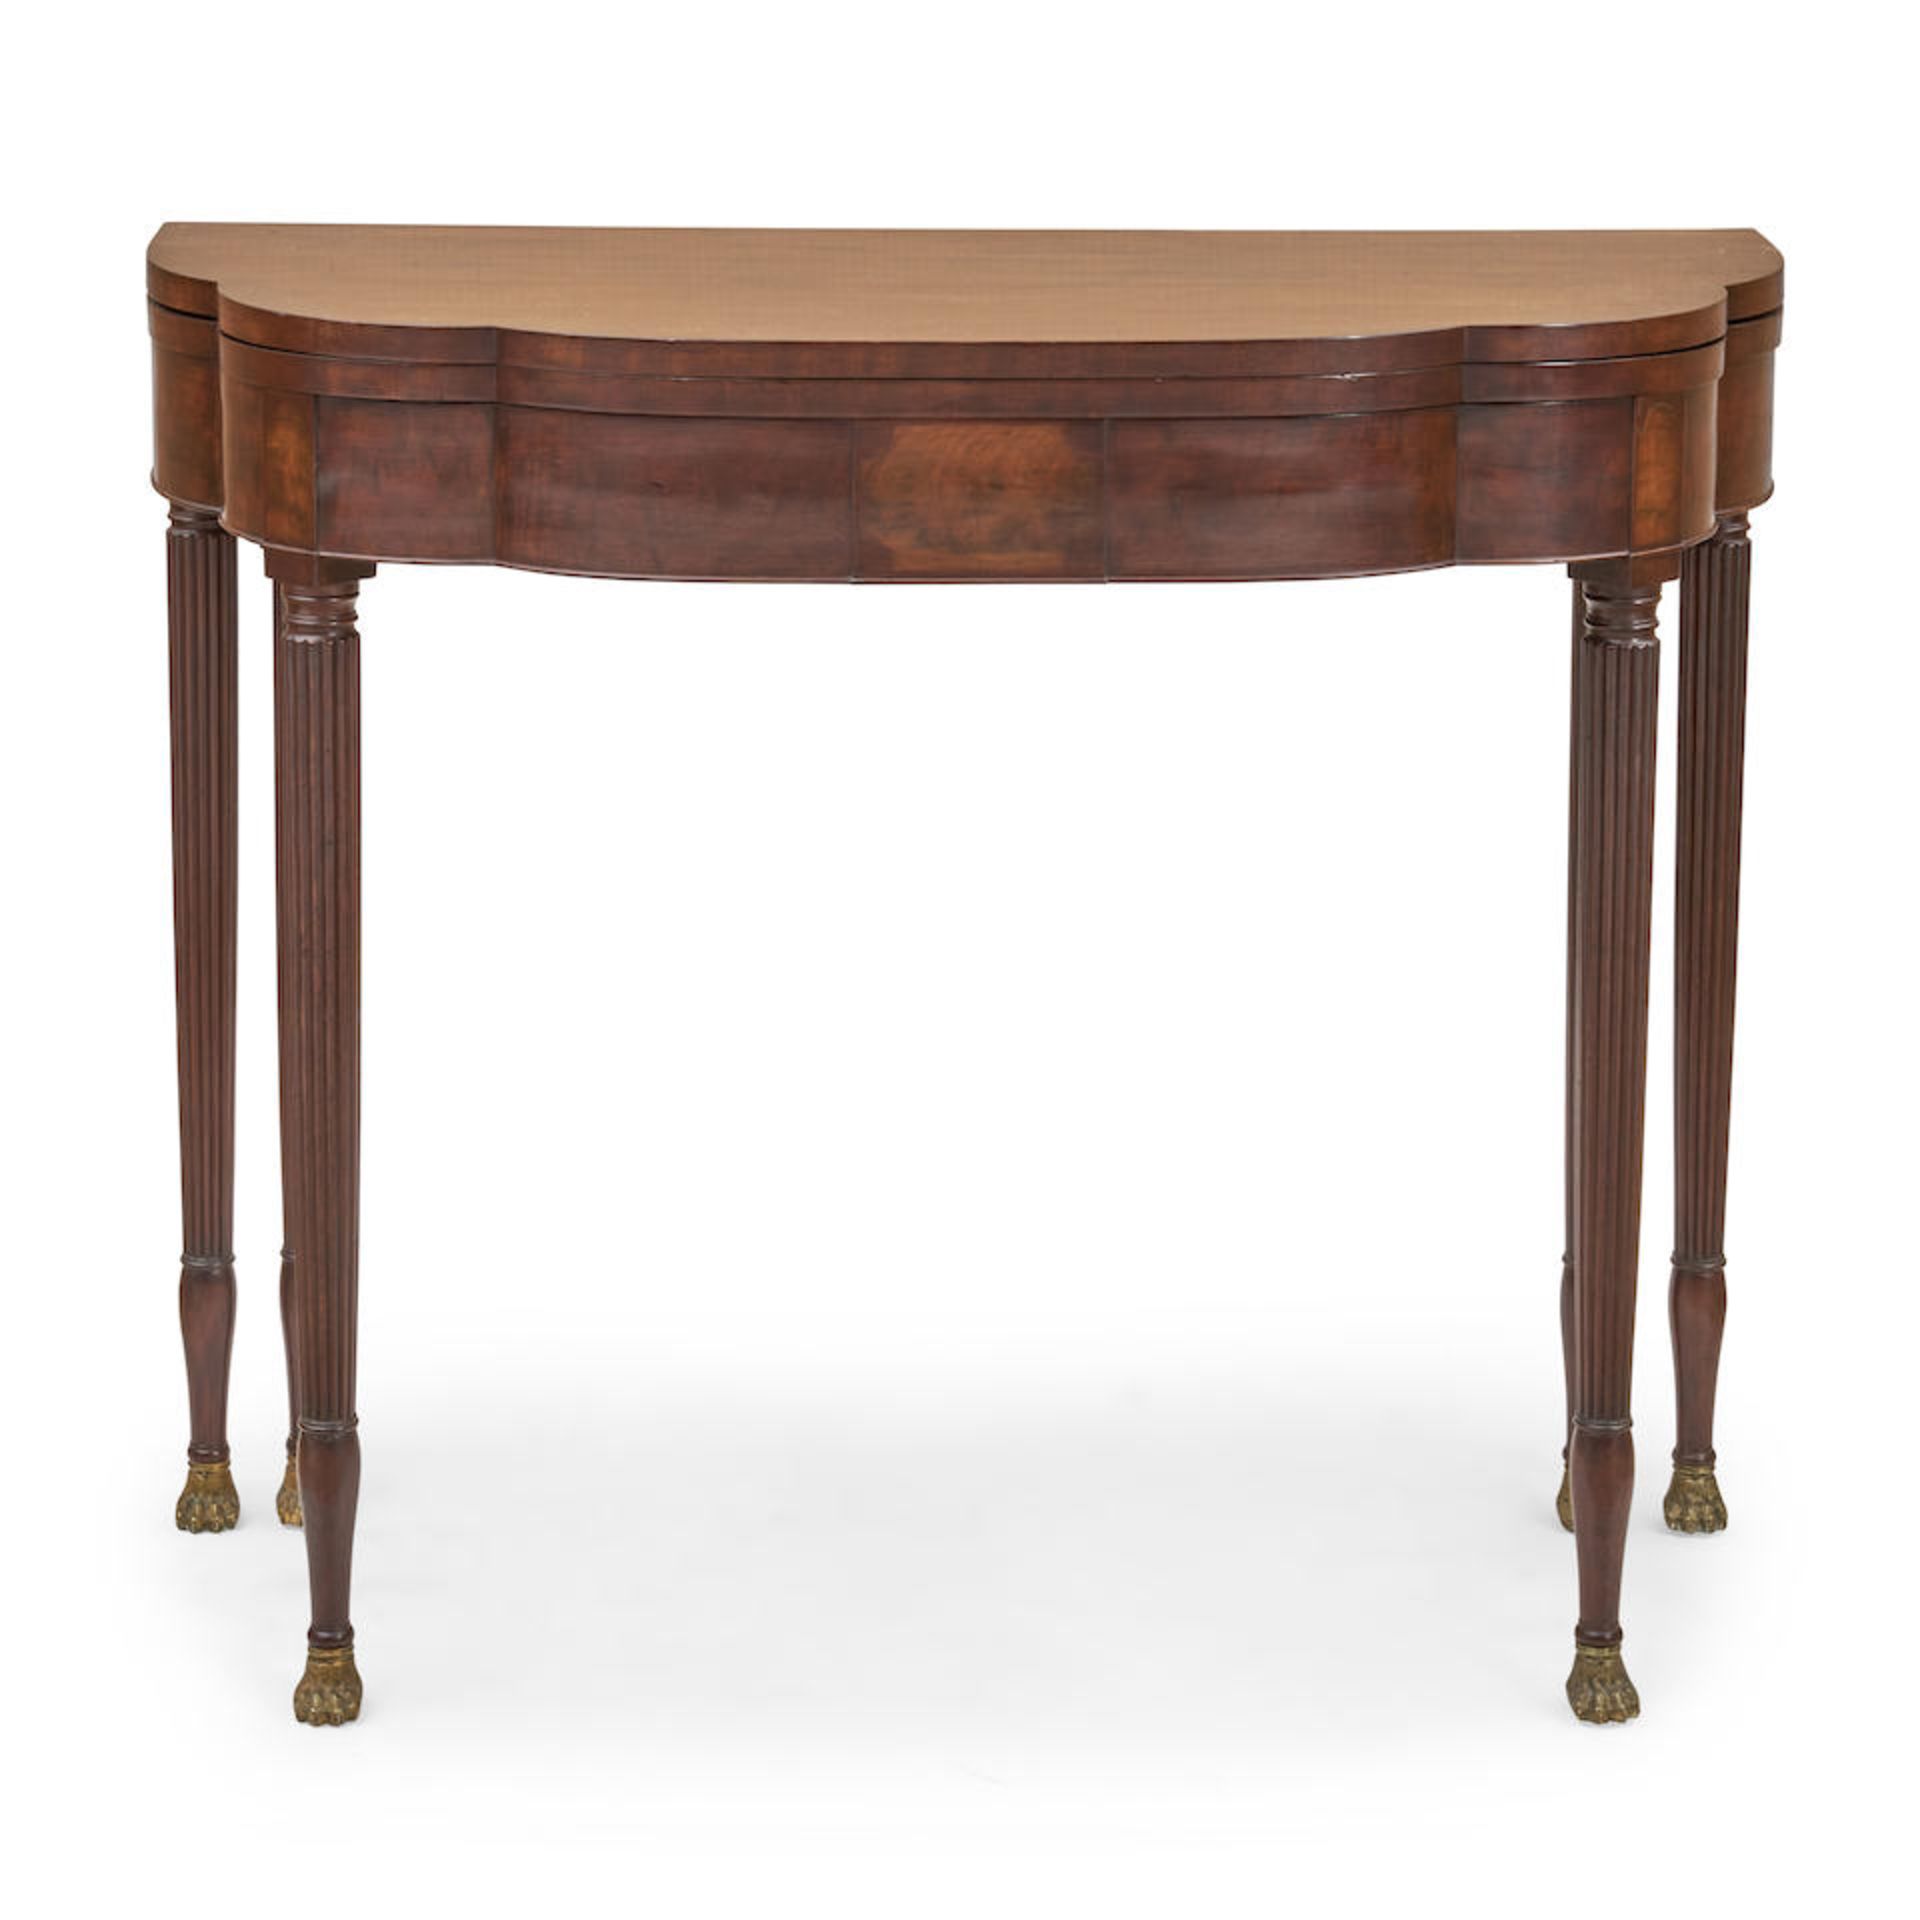 Federal Mahogany and Cherry Card Table, New York, New York, c. 1800.